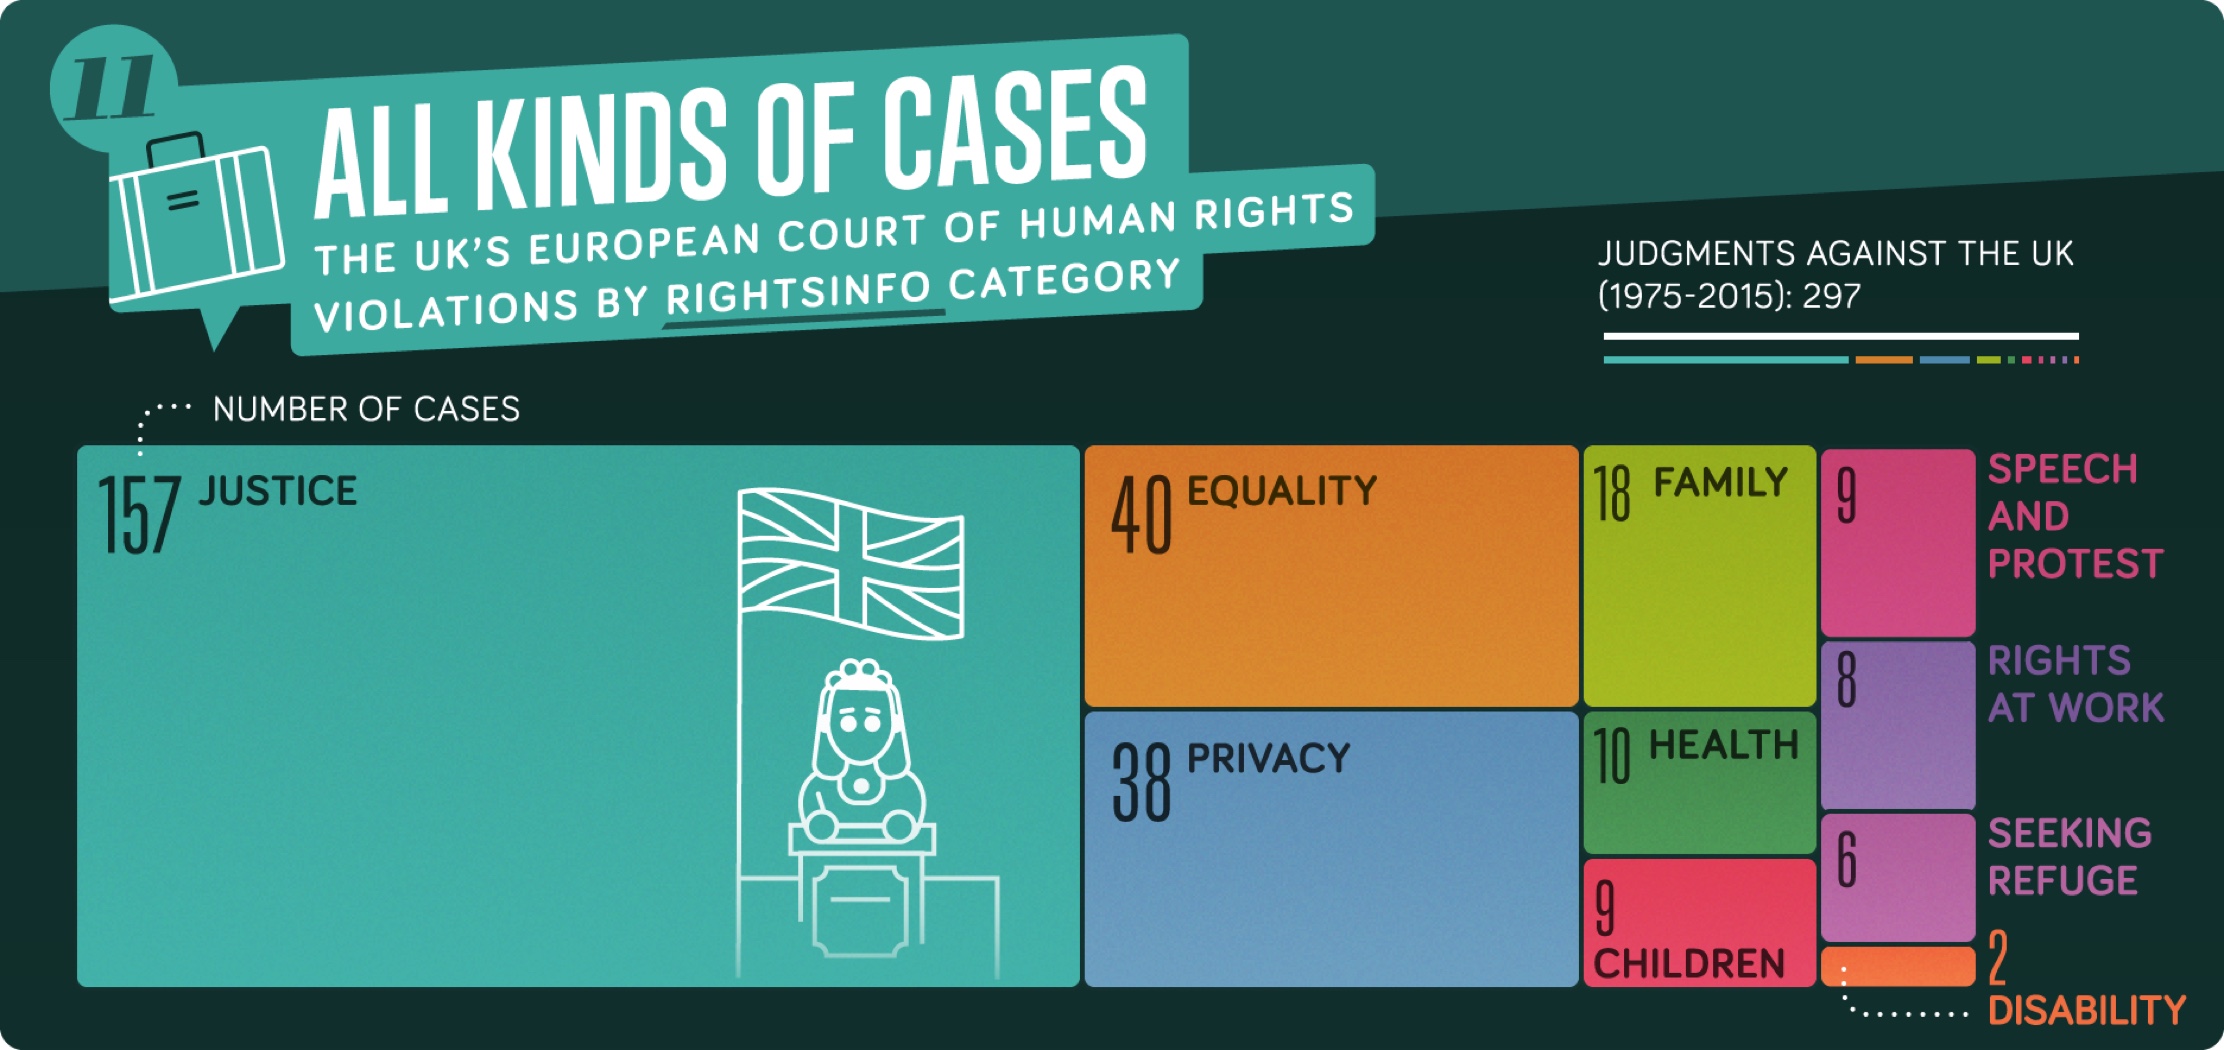 The European Court Of Human Rights Explained Eachother